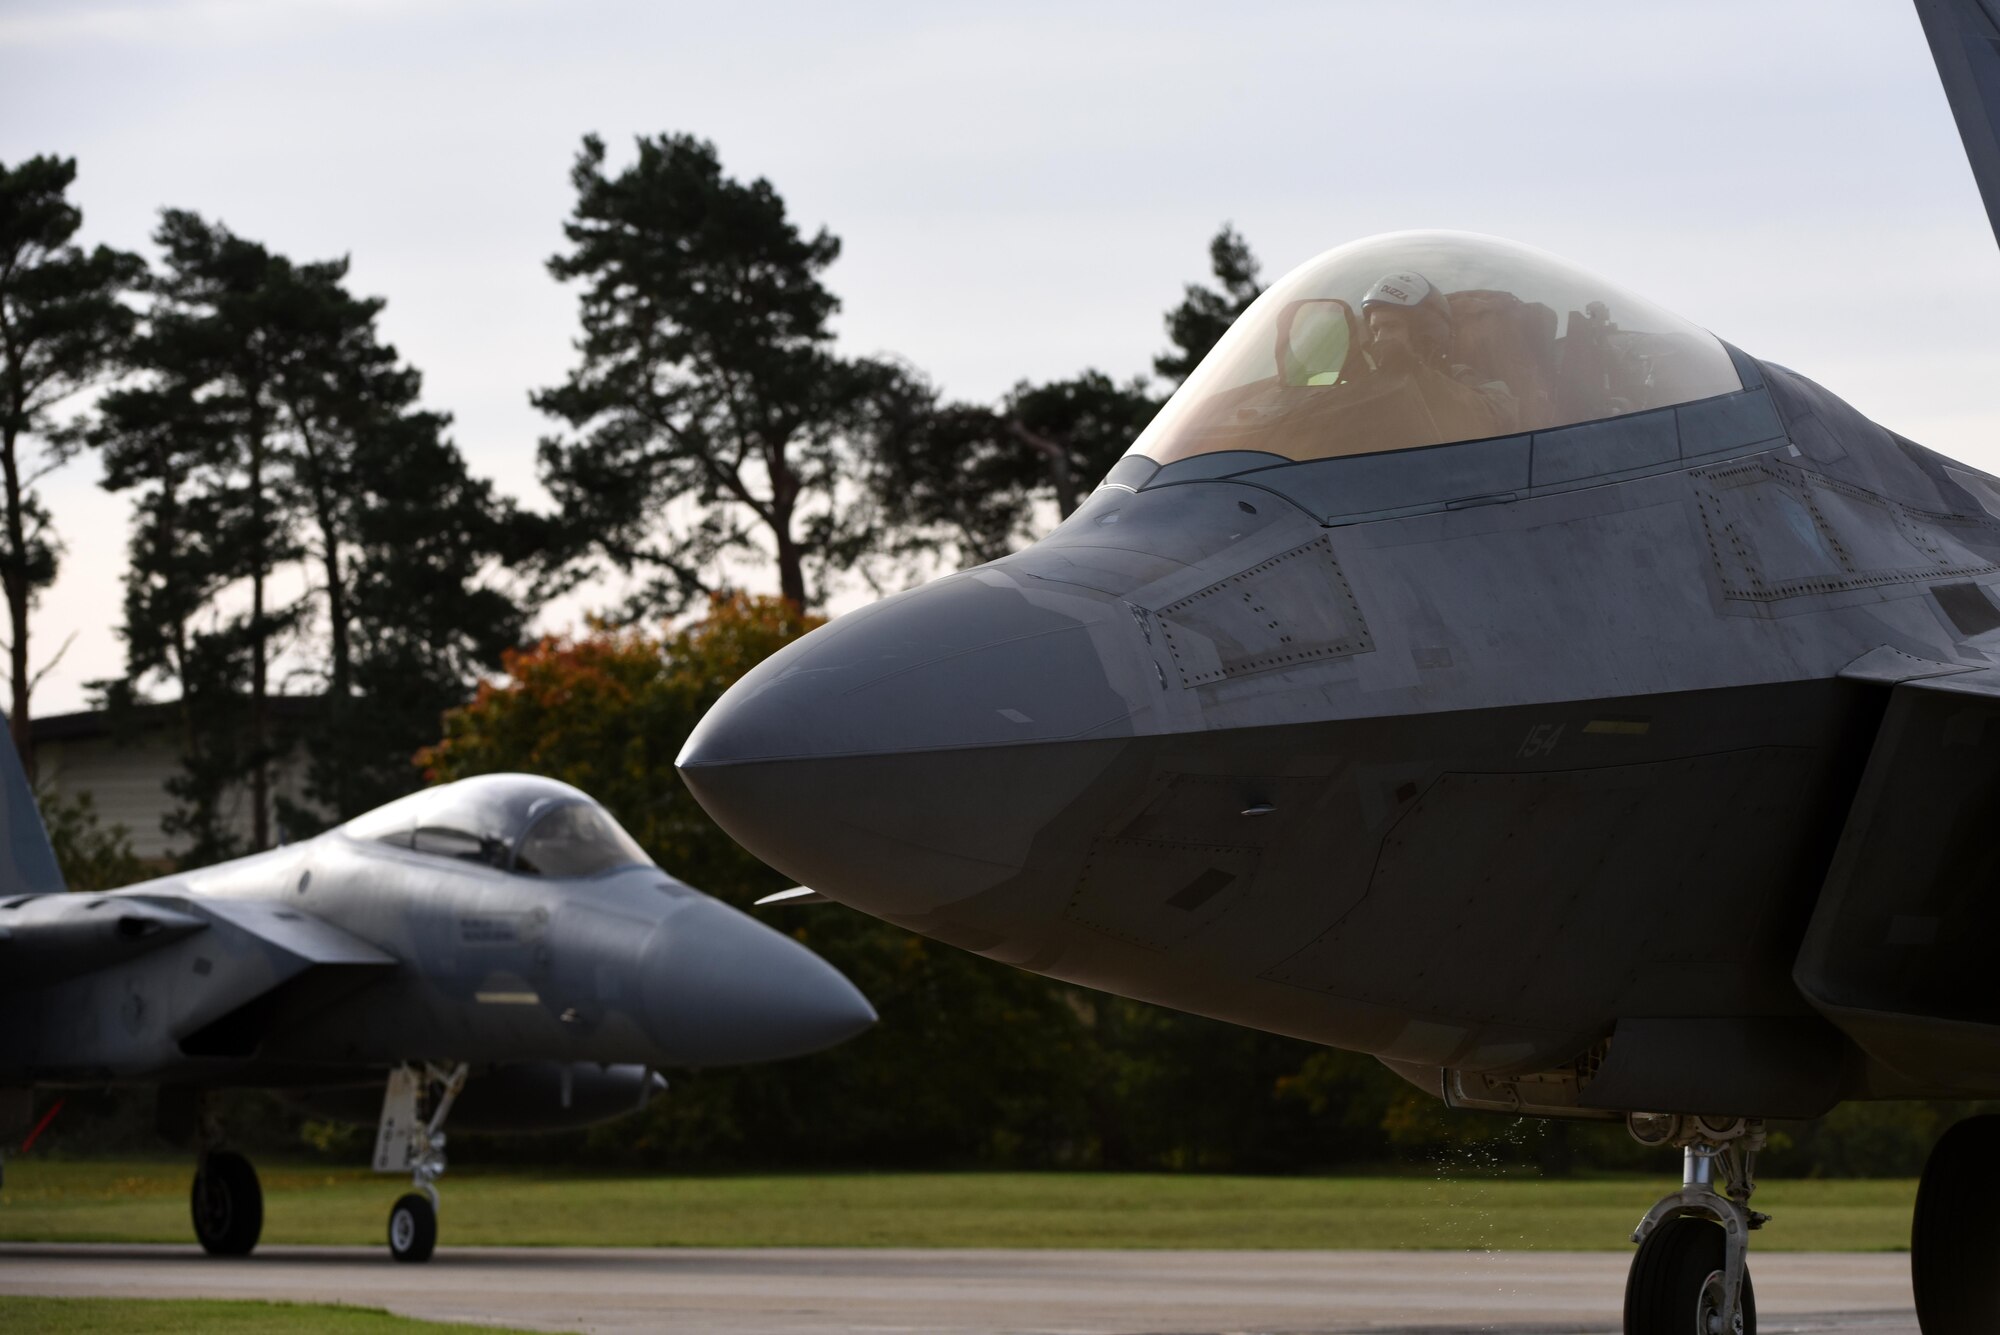 An F-22 Raptor from the 1st Fighter Wing, Joint Base Langley-Eustis, Virginia taxiis prior to take off at Royal Air Force Lakenheath, England, Oct. 12, 2017. Airmen and aircraft from the 48th Fighter Wing, the 1st Fighter Wing and the Royal Air Force have been training together during Exercise Eastern Zephyr, which started Oct. 10. (U.S. Air Force photo/Airman 1st Class Eli Chevalier